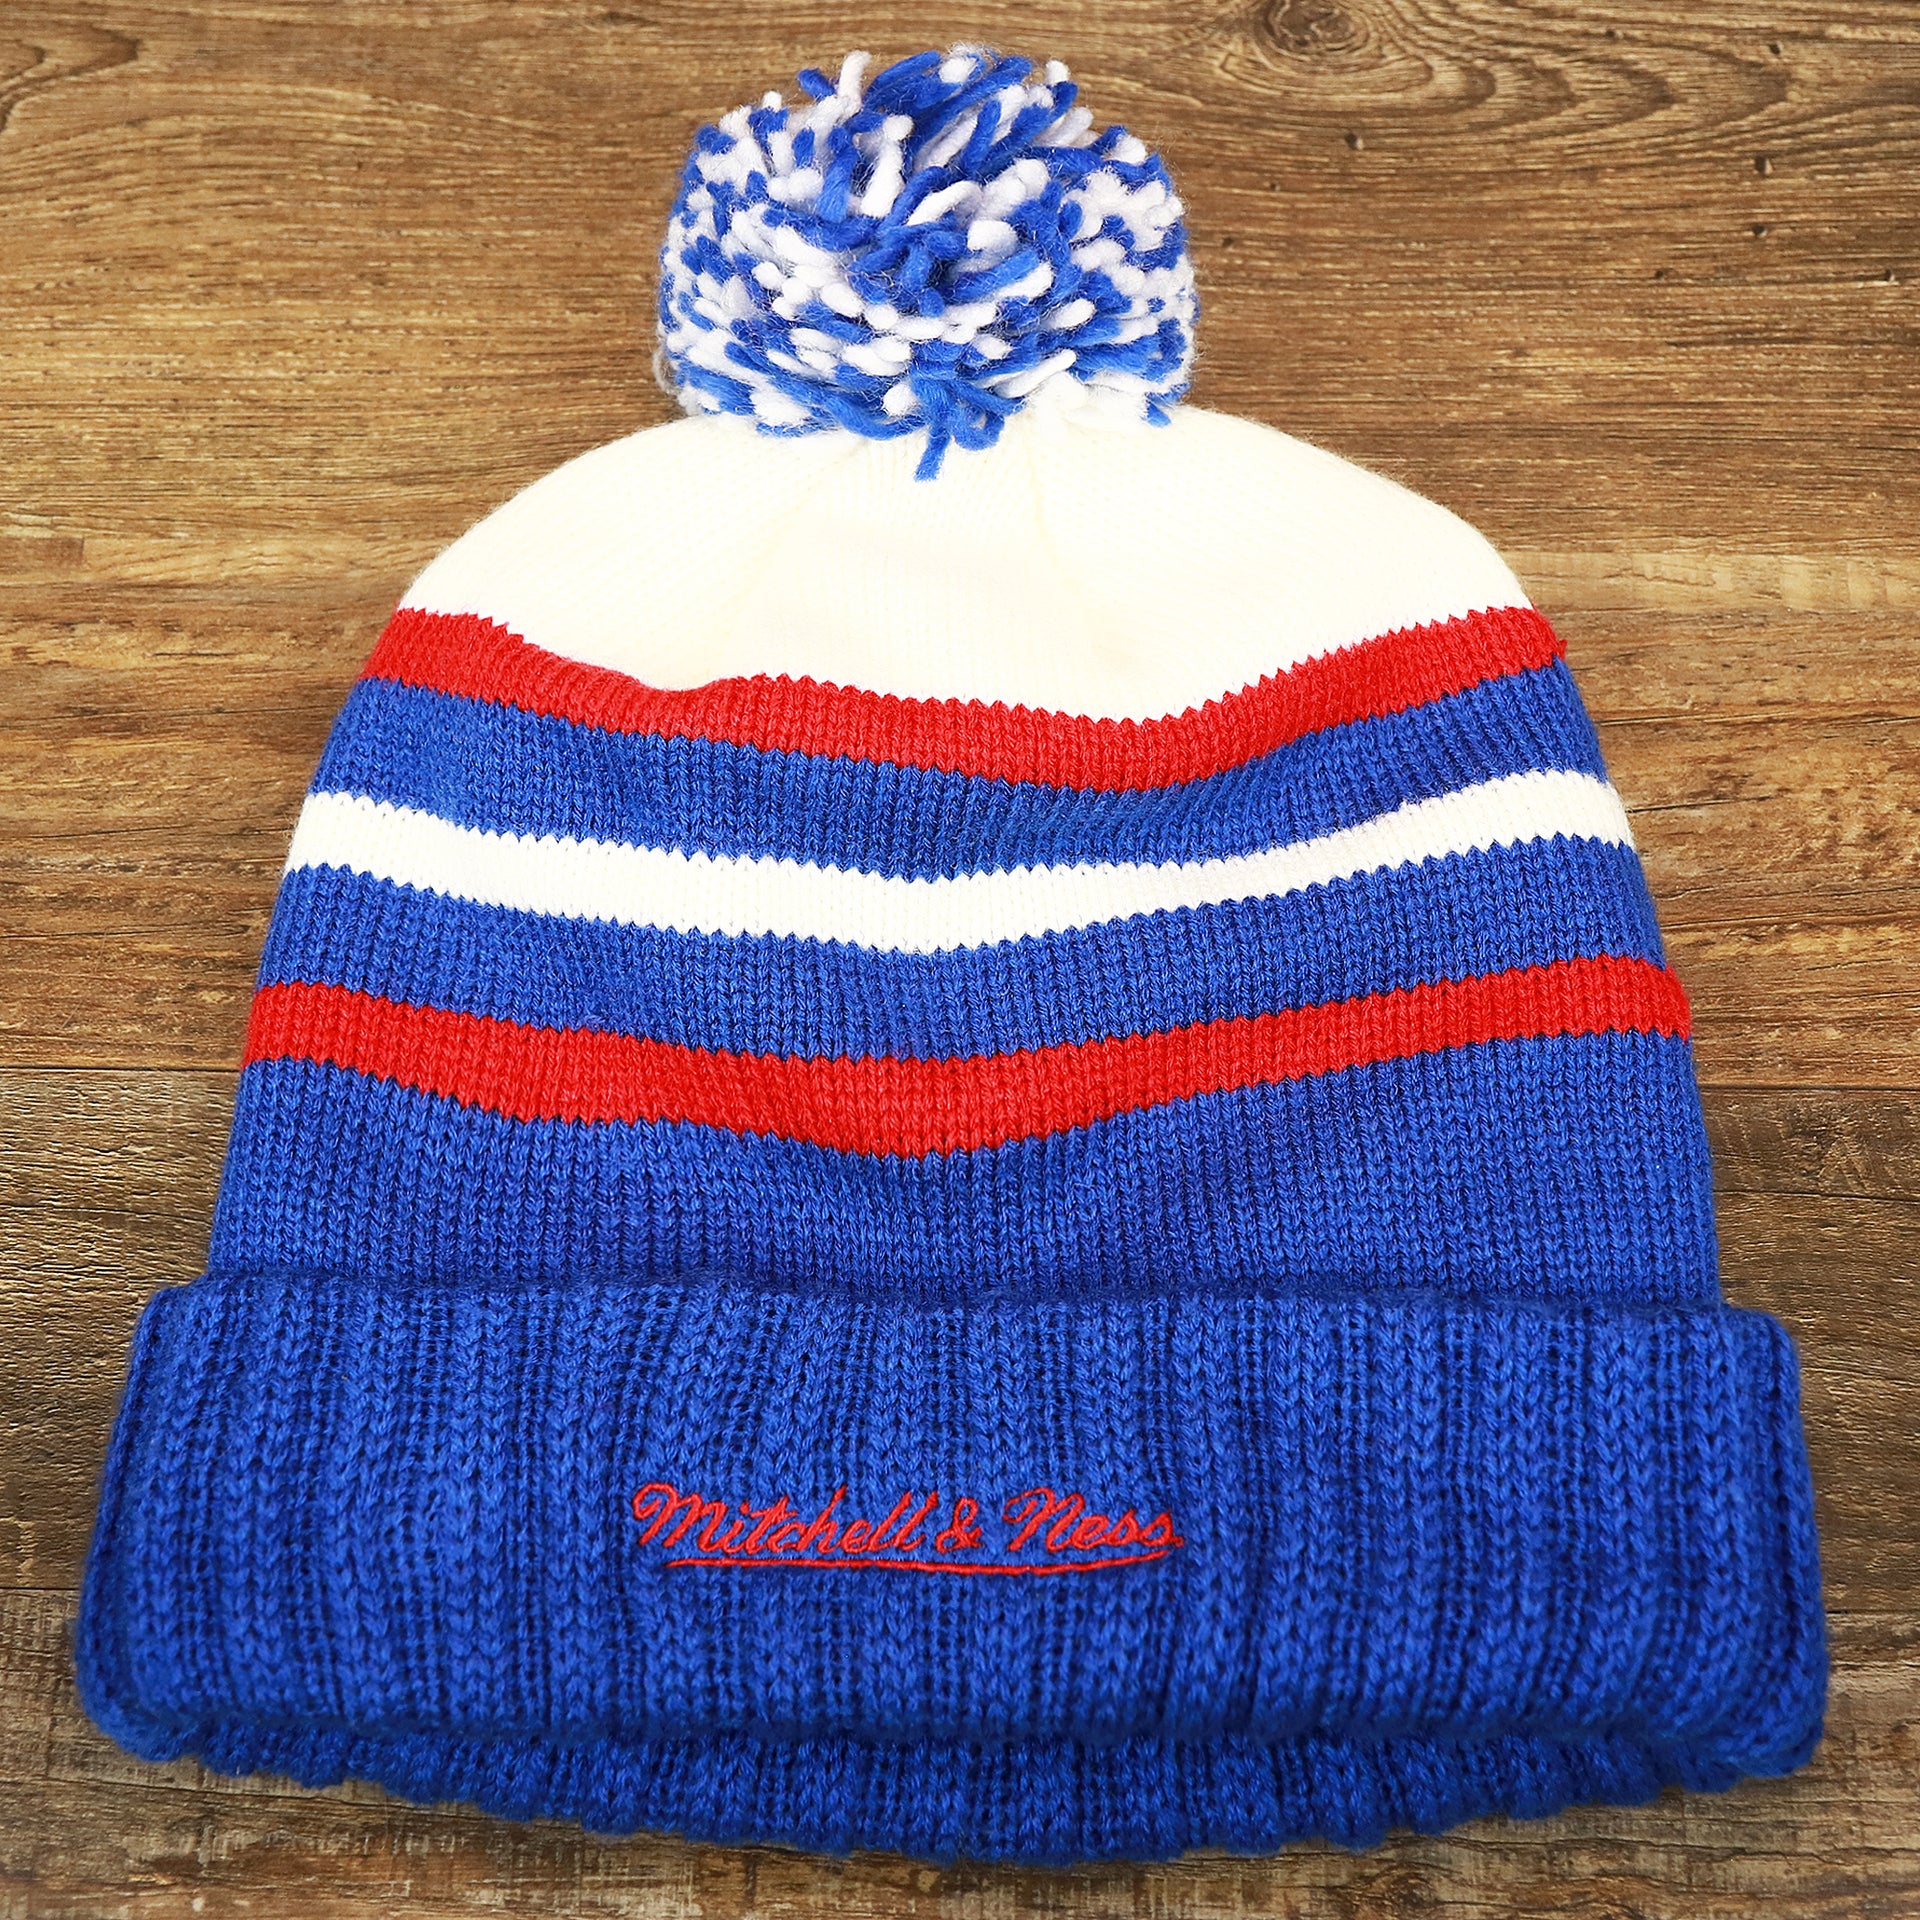 The backside of the Los Angeles Clippers Cursive Wordmark Blue Cuff Pom Pom Winter Beanie | Blue Striped Winter Beanie